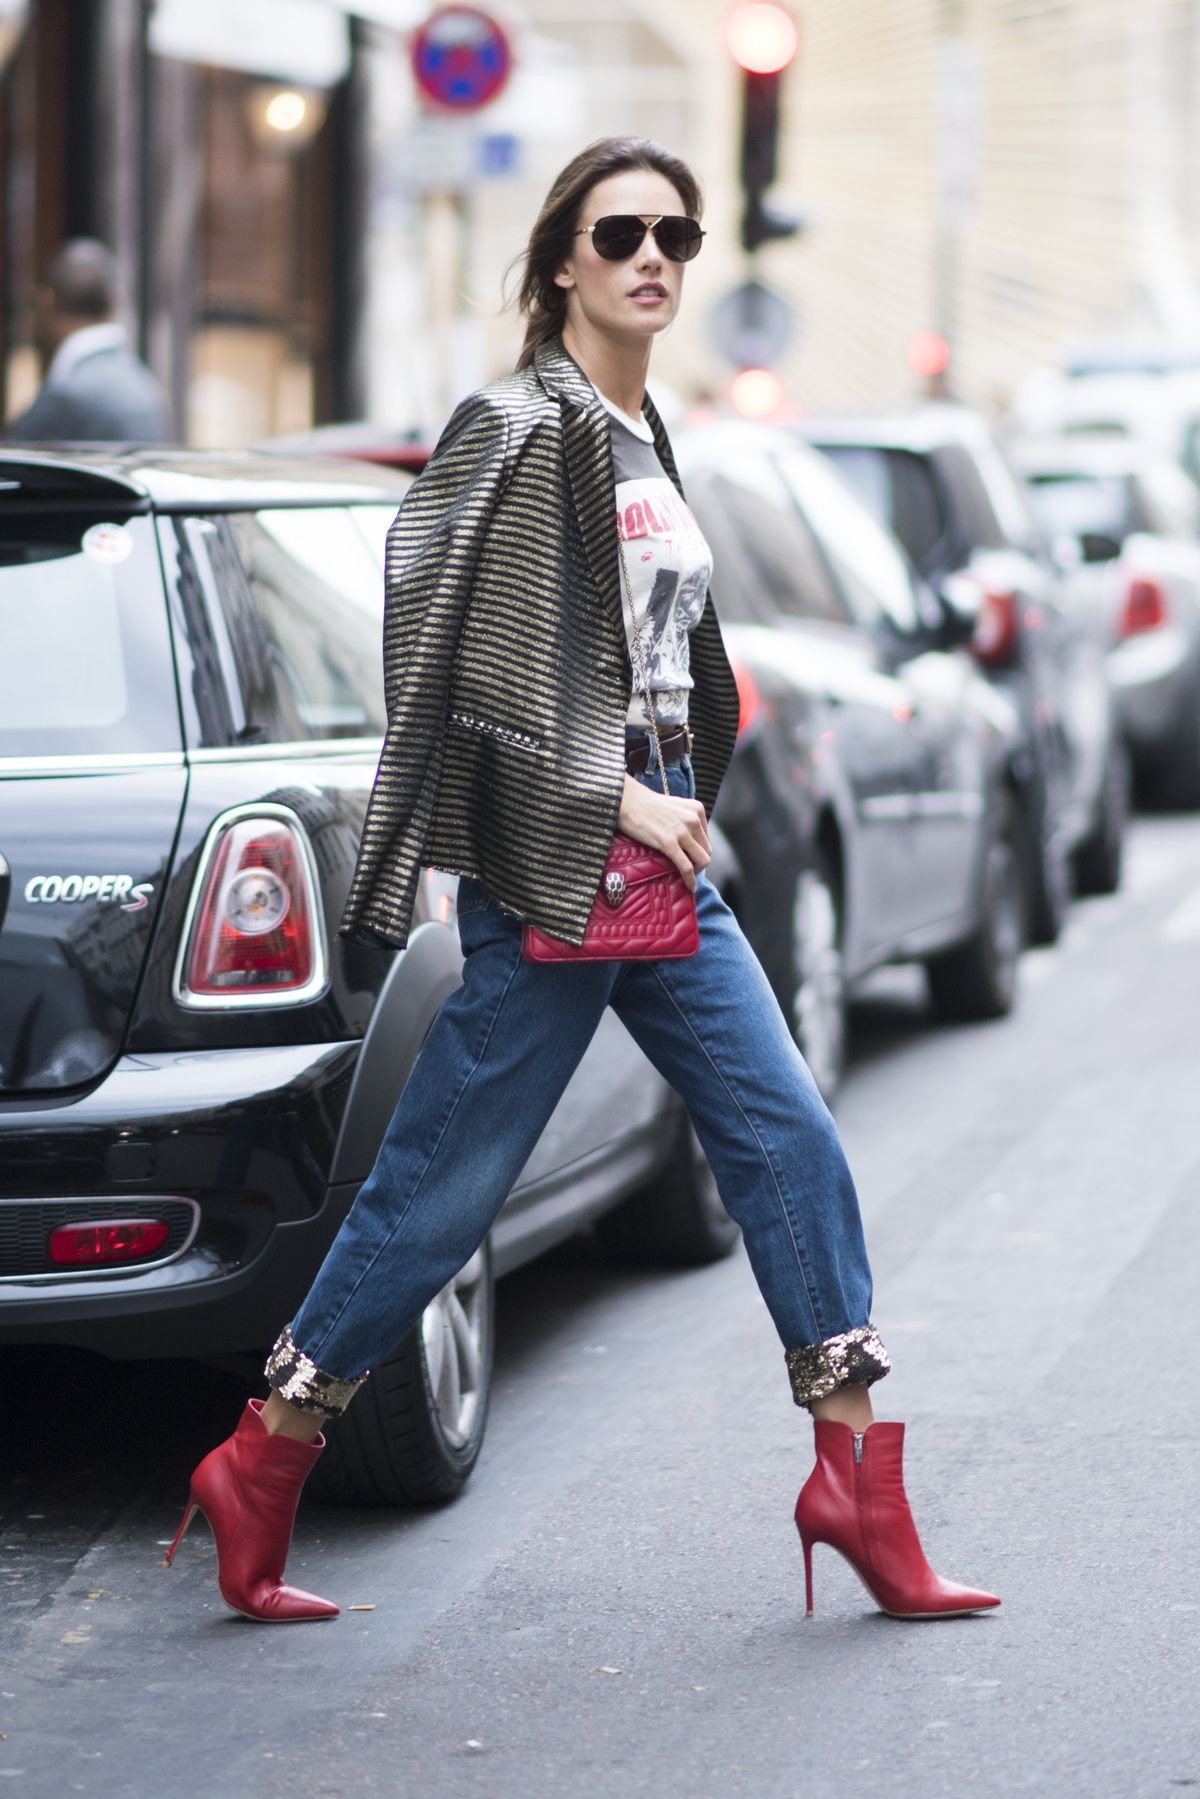 Models off-duty: every look we're copying from fashion month - Vogue ...